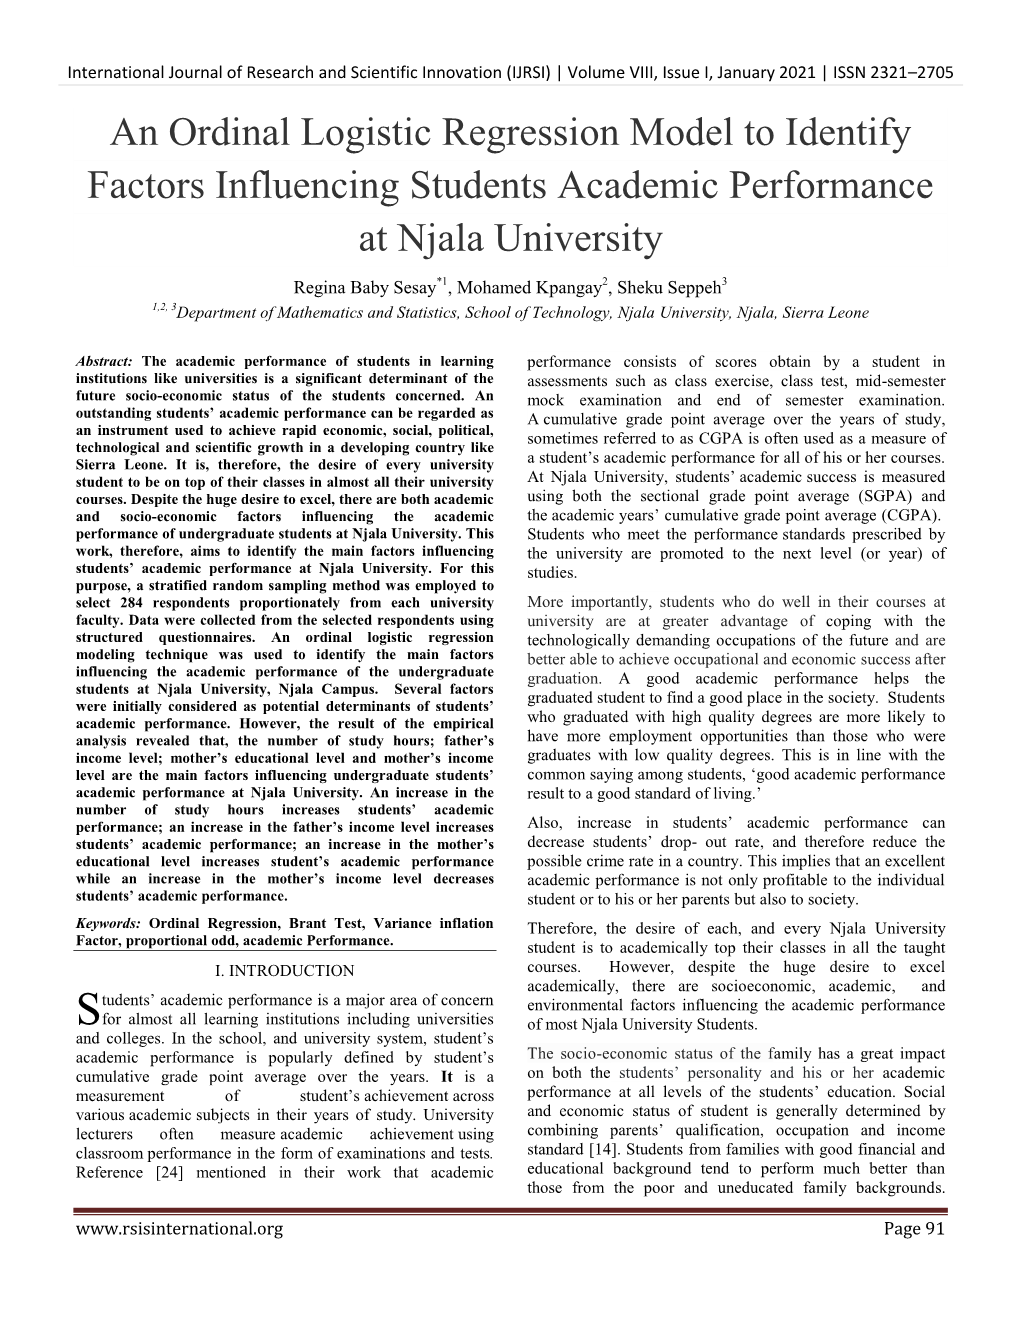 An Ordinal Logistic Regression Model to Identify Factors Influencing Students Academic Performance at Njala University